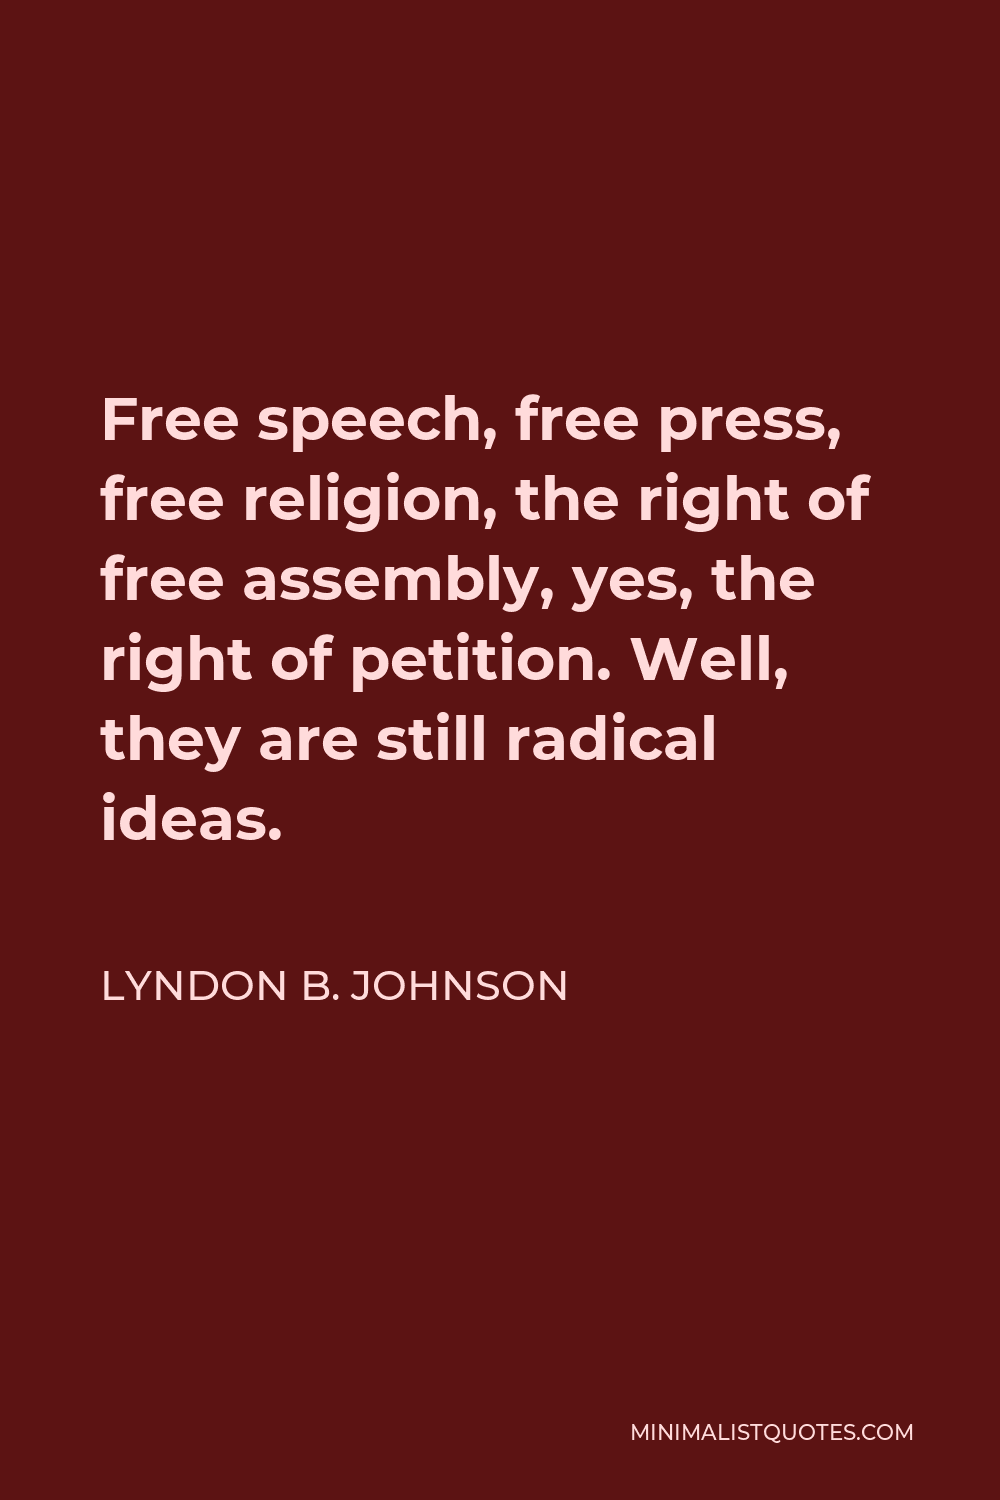 Lyndon B. Johnson Quote - Free speech, free press, free religion, the right of free assembly, yes, the right of petition. Well, they are still radical ideas.